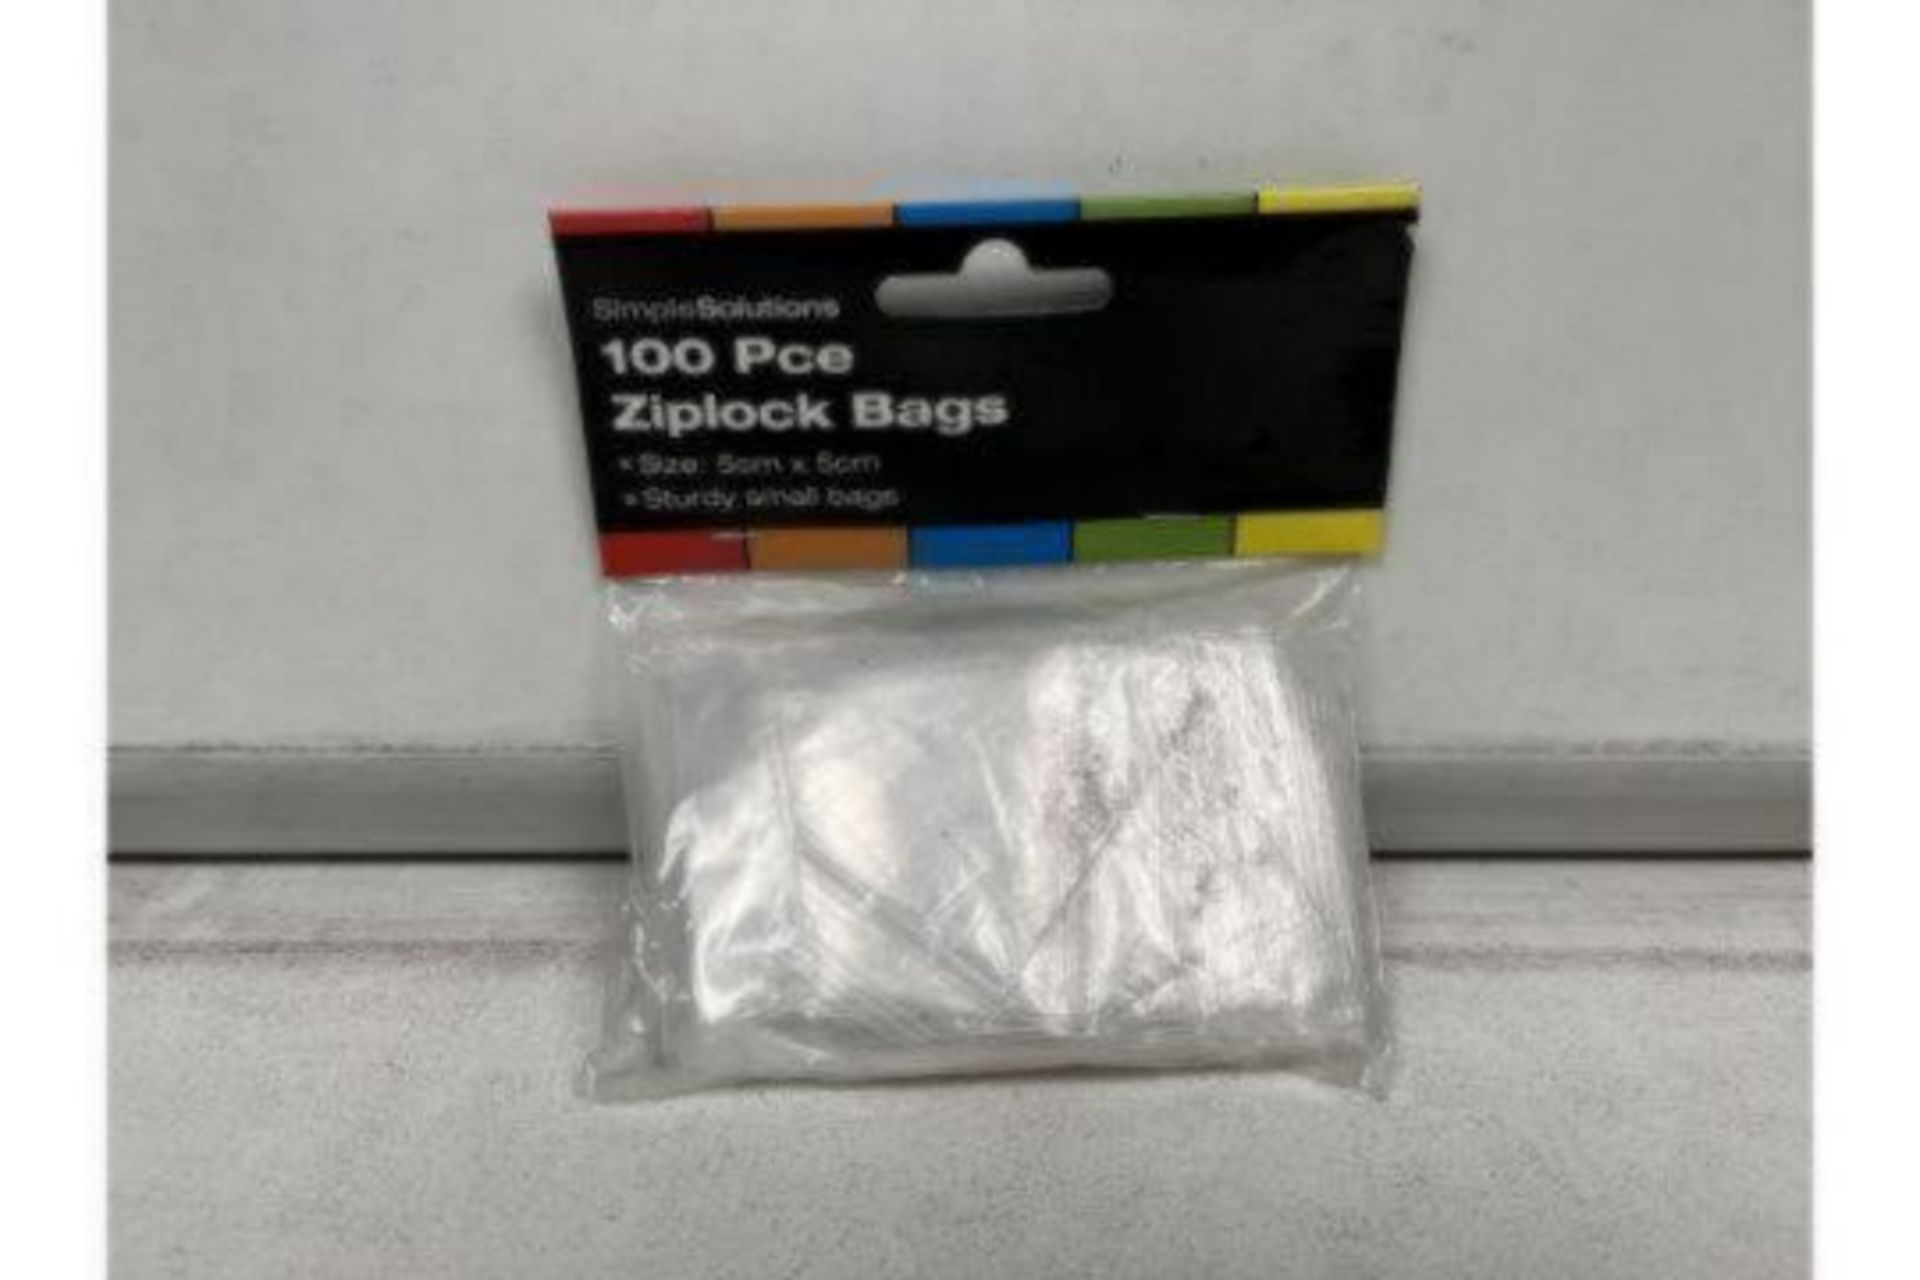 180 X NEW PACKAGED SIMPLE SOLUTIONS PACKS OF 100 ZIPLOCK BAGS. SIZE 5X5CM. STURDY DESIGN. (